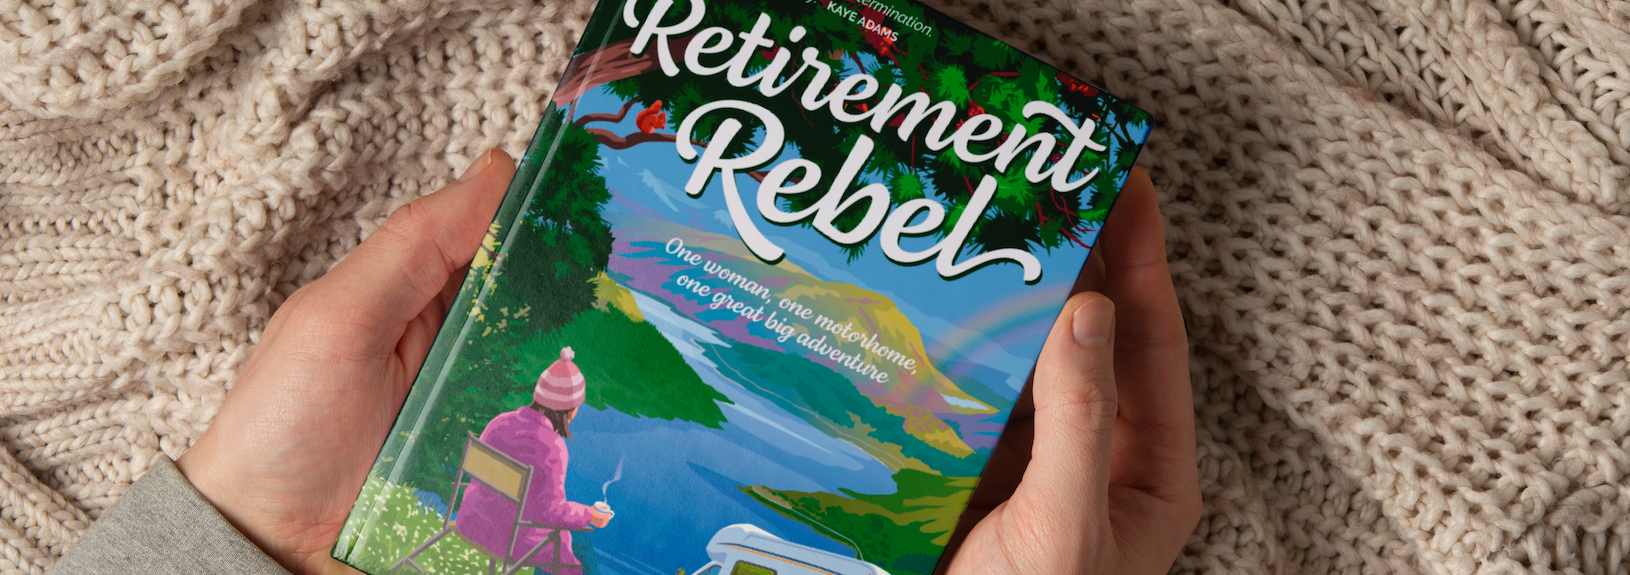 London Aging2.0 Book Club - In Conversation with Siobhan Daniels, author of ‘Retirement Rebel'